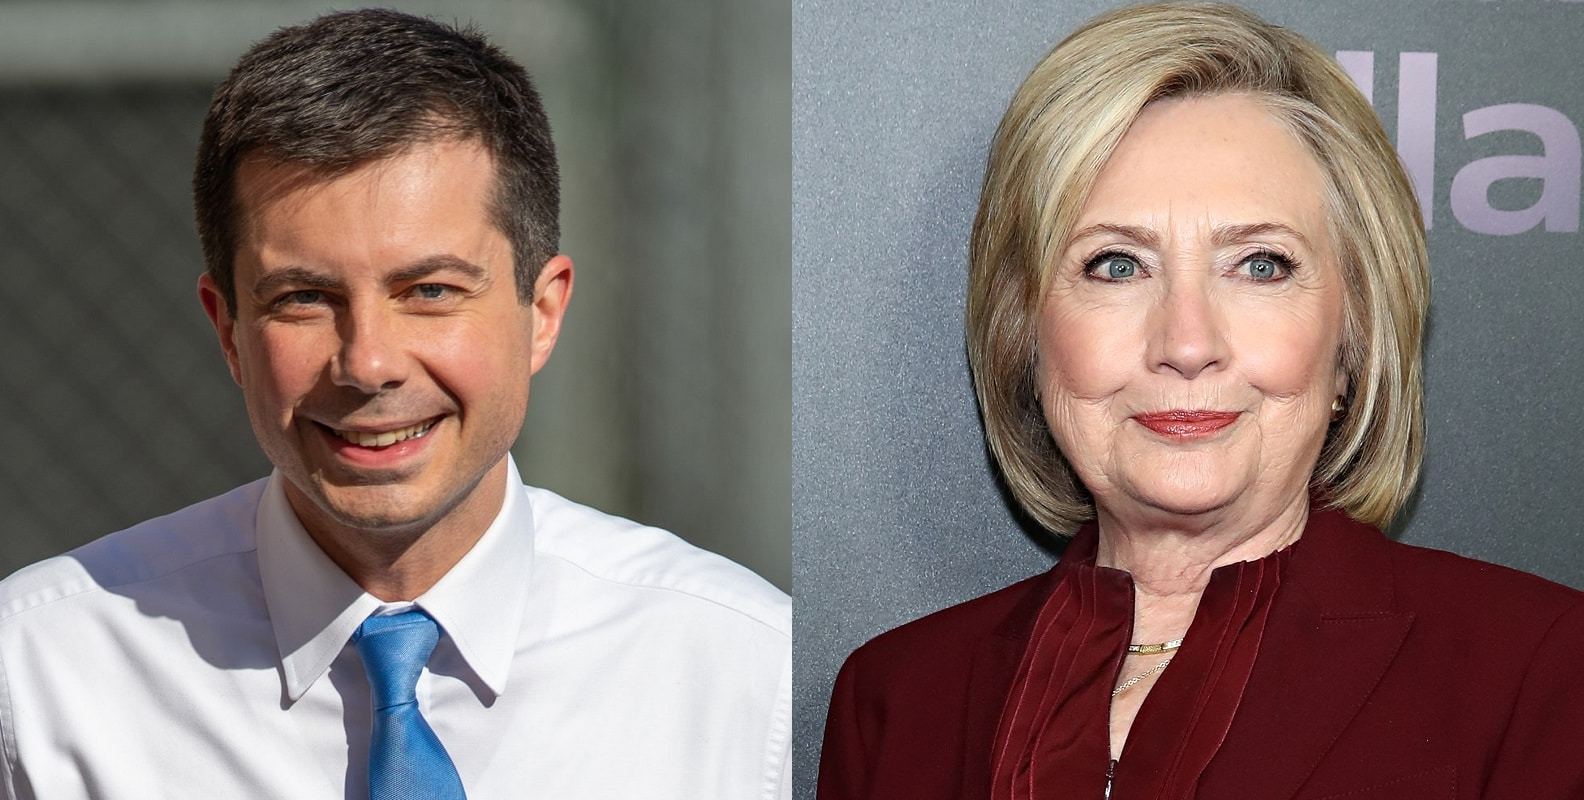 Former secretary of state Hillary Clinton shared tips with Pete Buttigieg